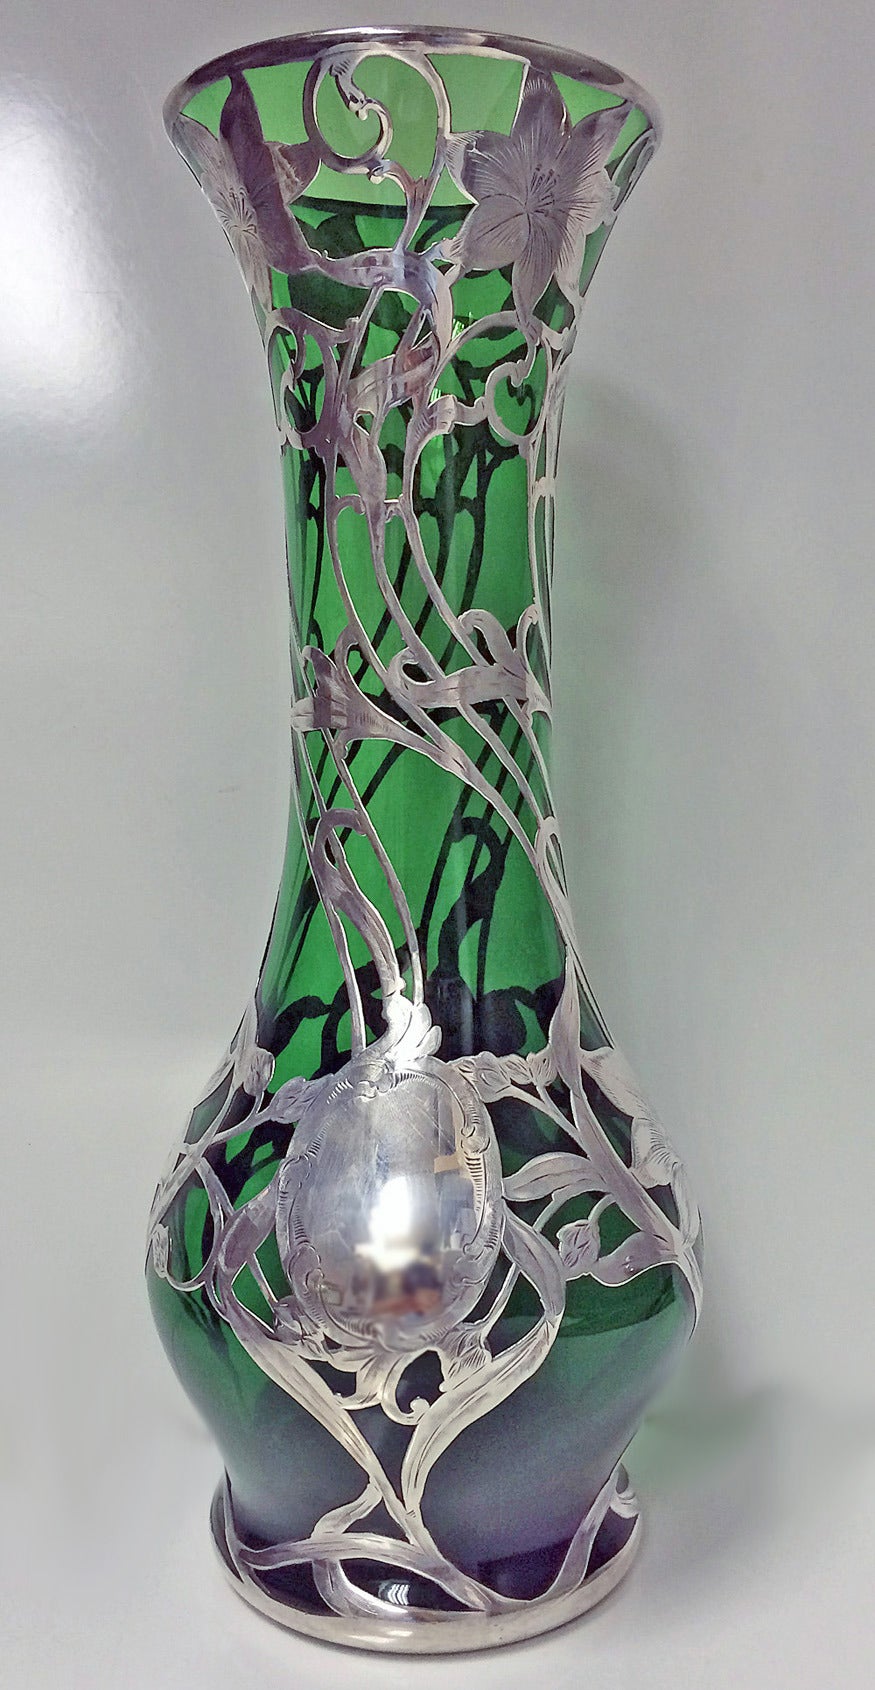 Large Art Nouveau emerald glass vase with sterling silver overlay. Made by Alvin, providence, circa 1900. The vase of slightly bulbous tapering form, everted rim. Thick applied silver overlay in form of lush and open blossoms with whiplash stems and